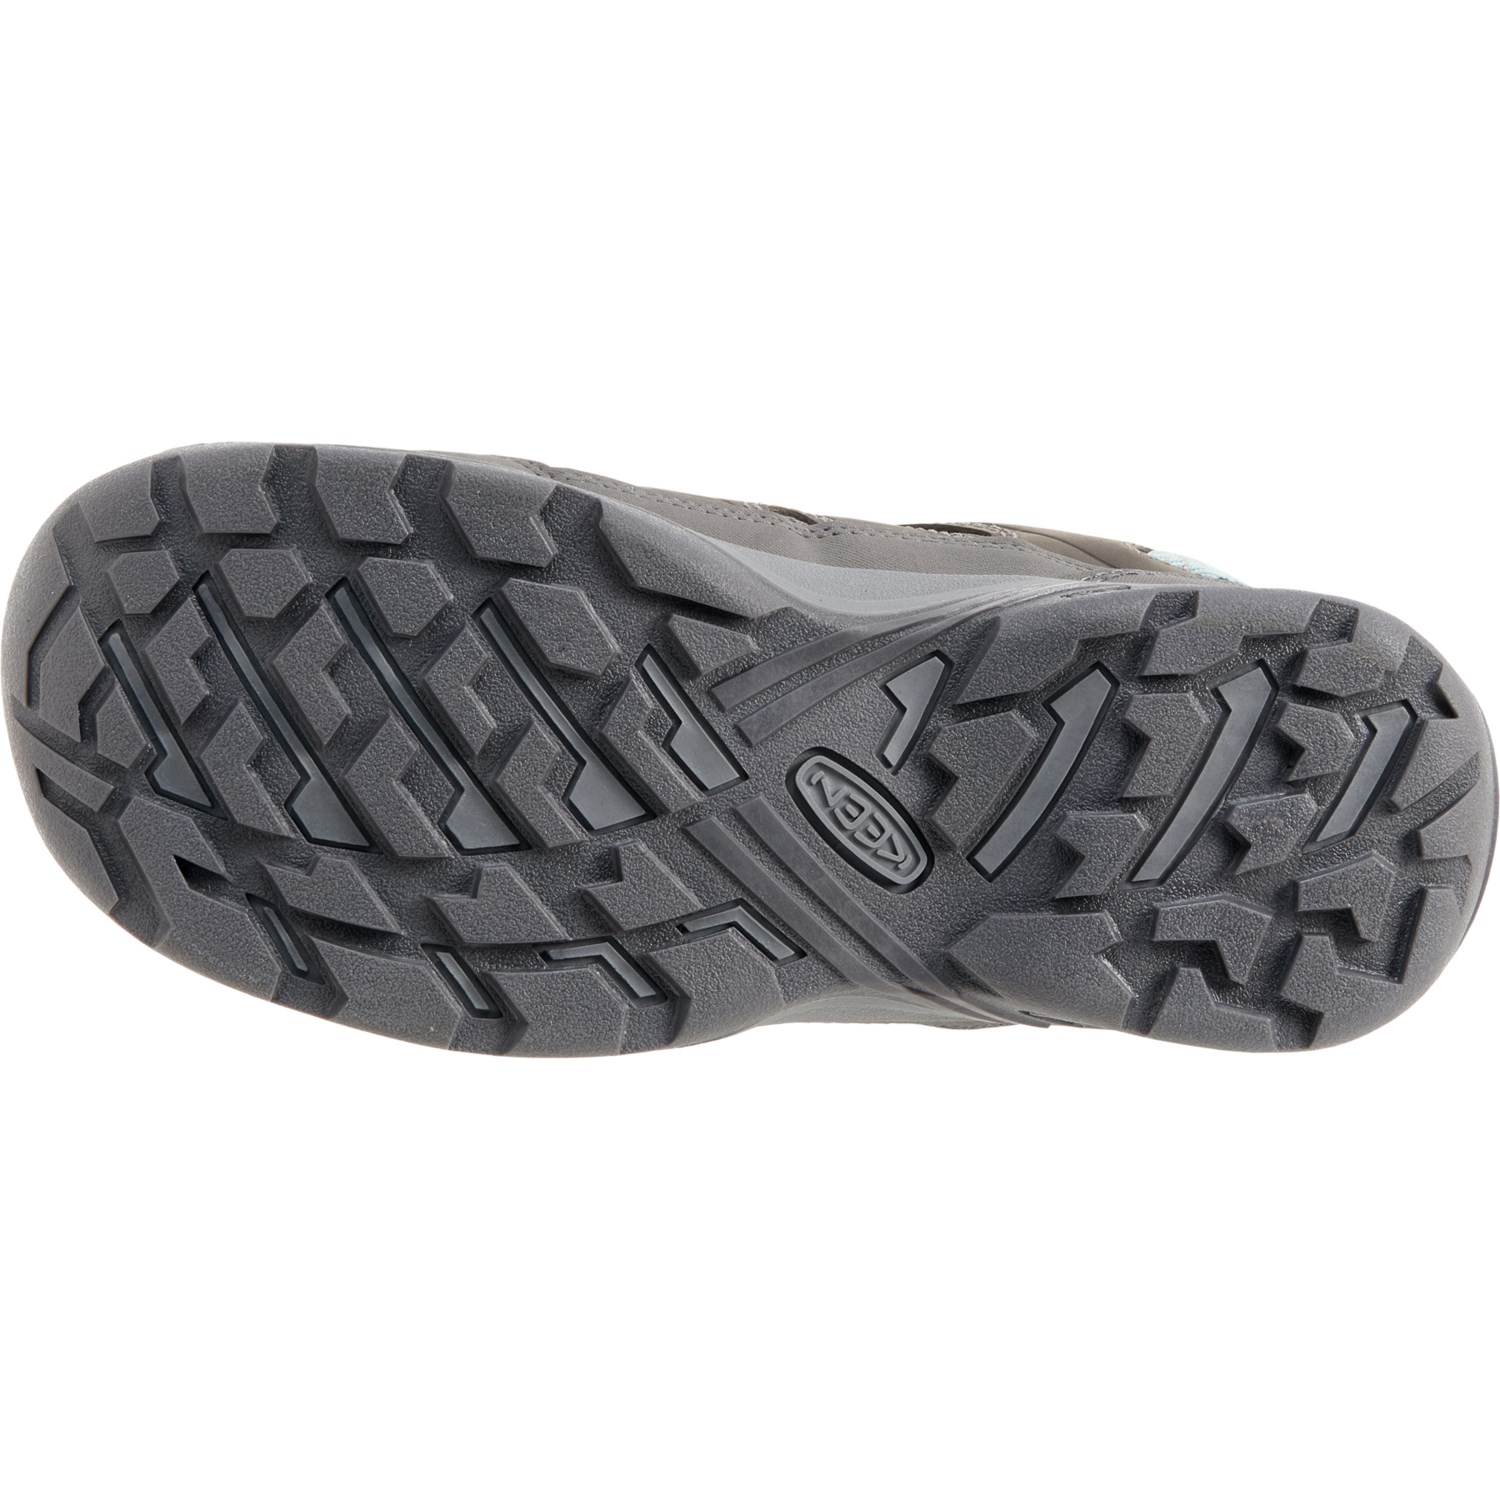 Keen Circadia Vent Trail Hiking Shoes (For Women) - Save 44%